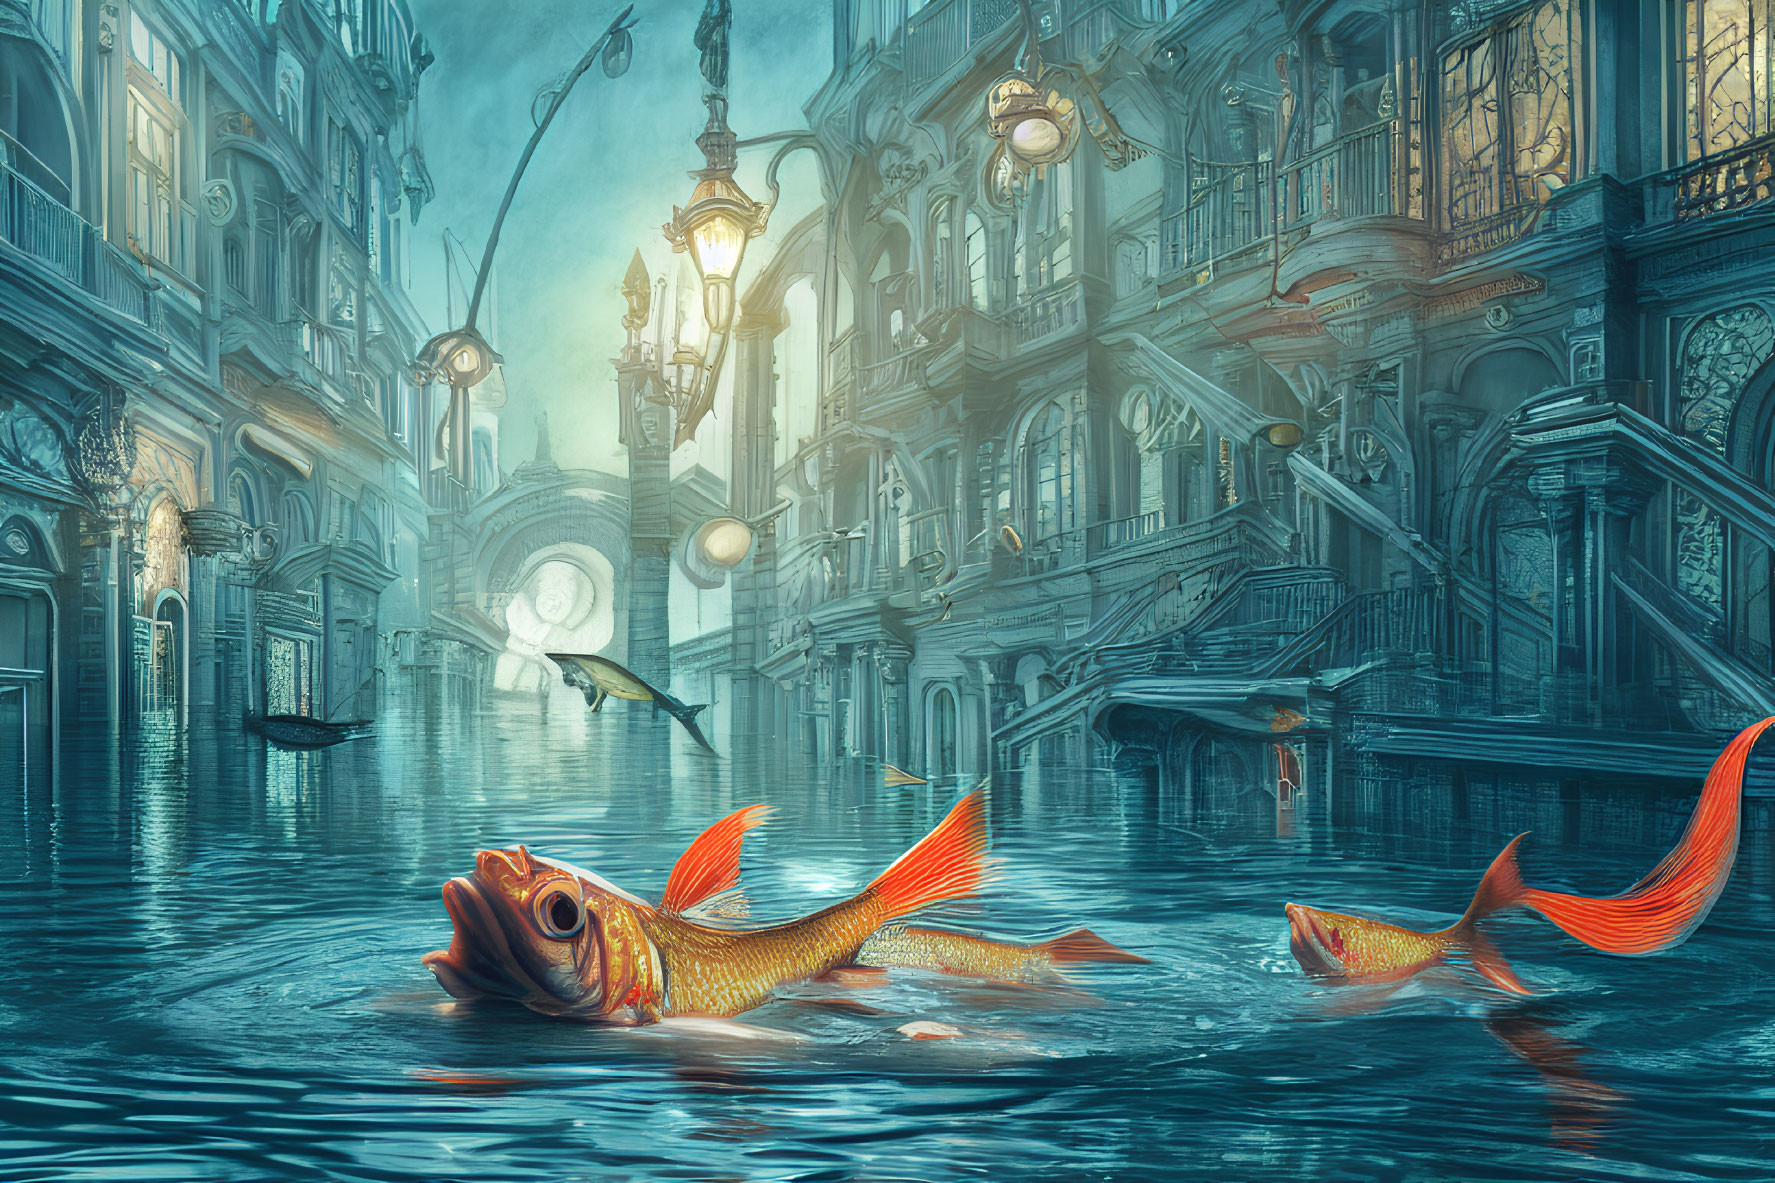  Fish Swimming Through a Flooded City